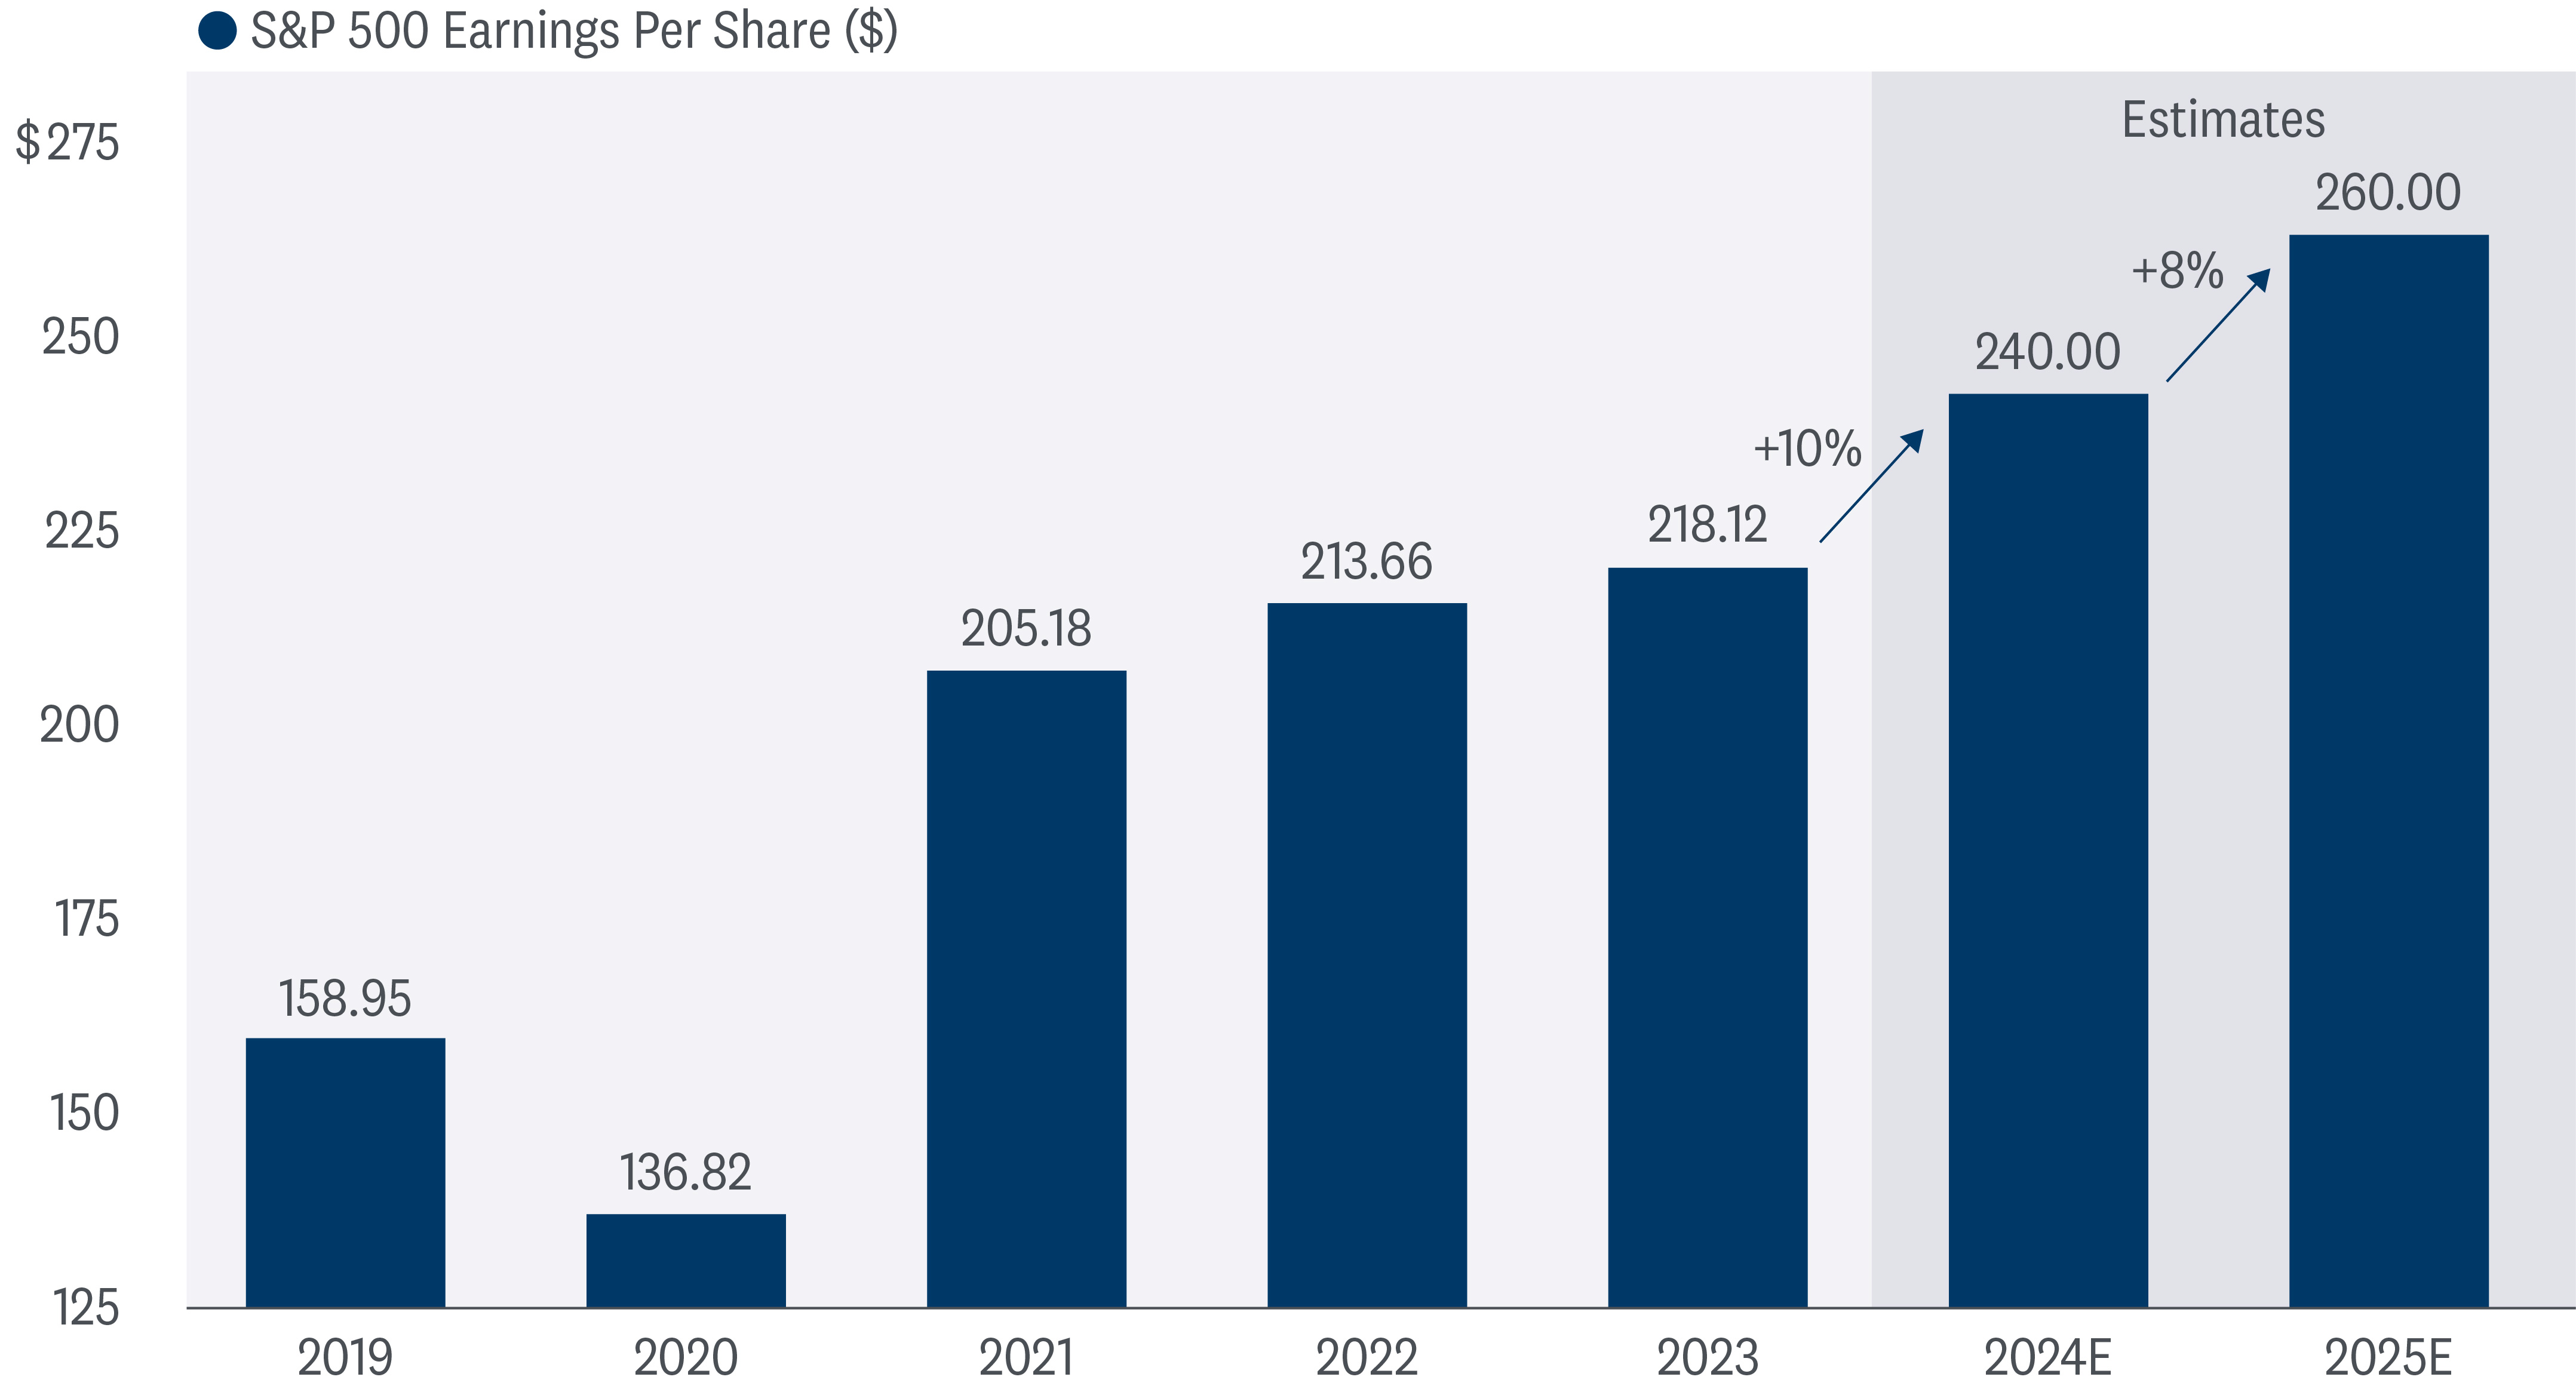 Bar graph of S&P 500 earnings per share from 2019 to 2025 (estimate). The earnings per share have been increasing each year, and the estimates for 2024 and 2025 are even higher. The chart highlights earnings per share are expected to grow by 10% in 2024 and by 8% in 2025. 